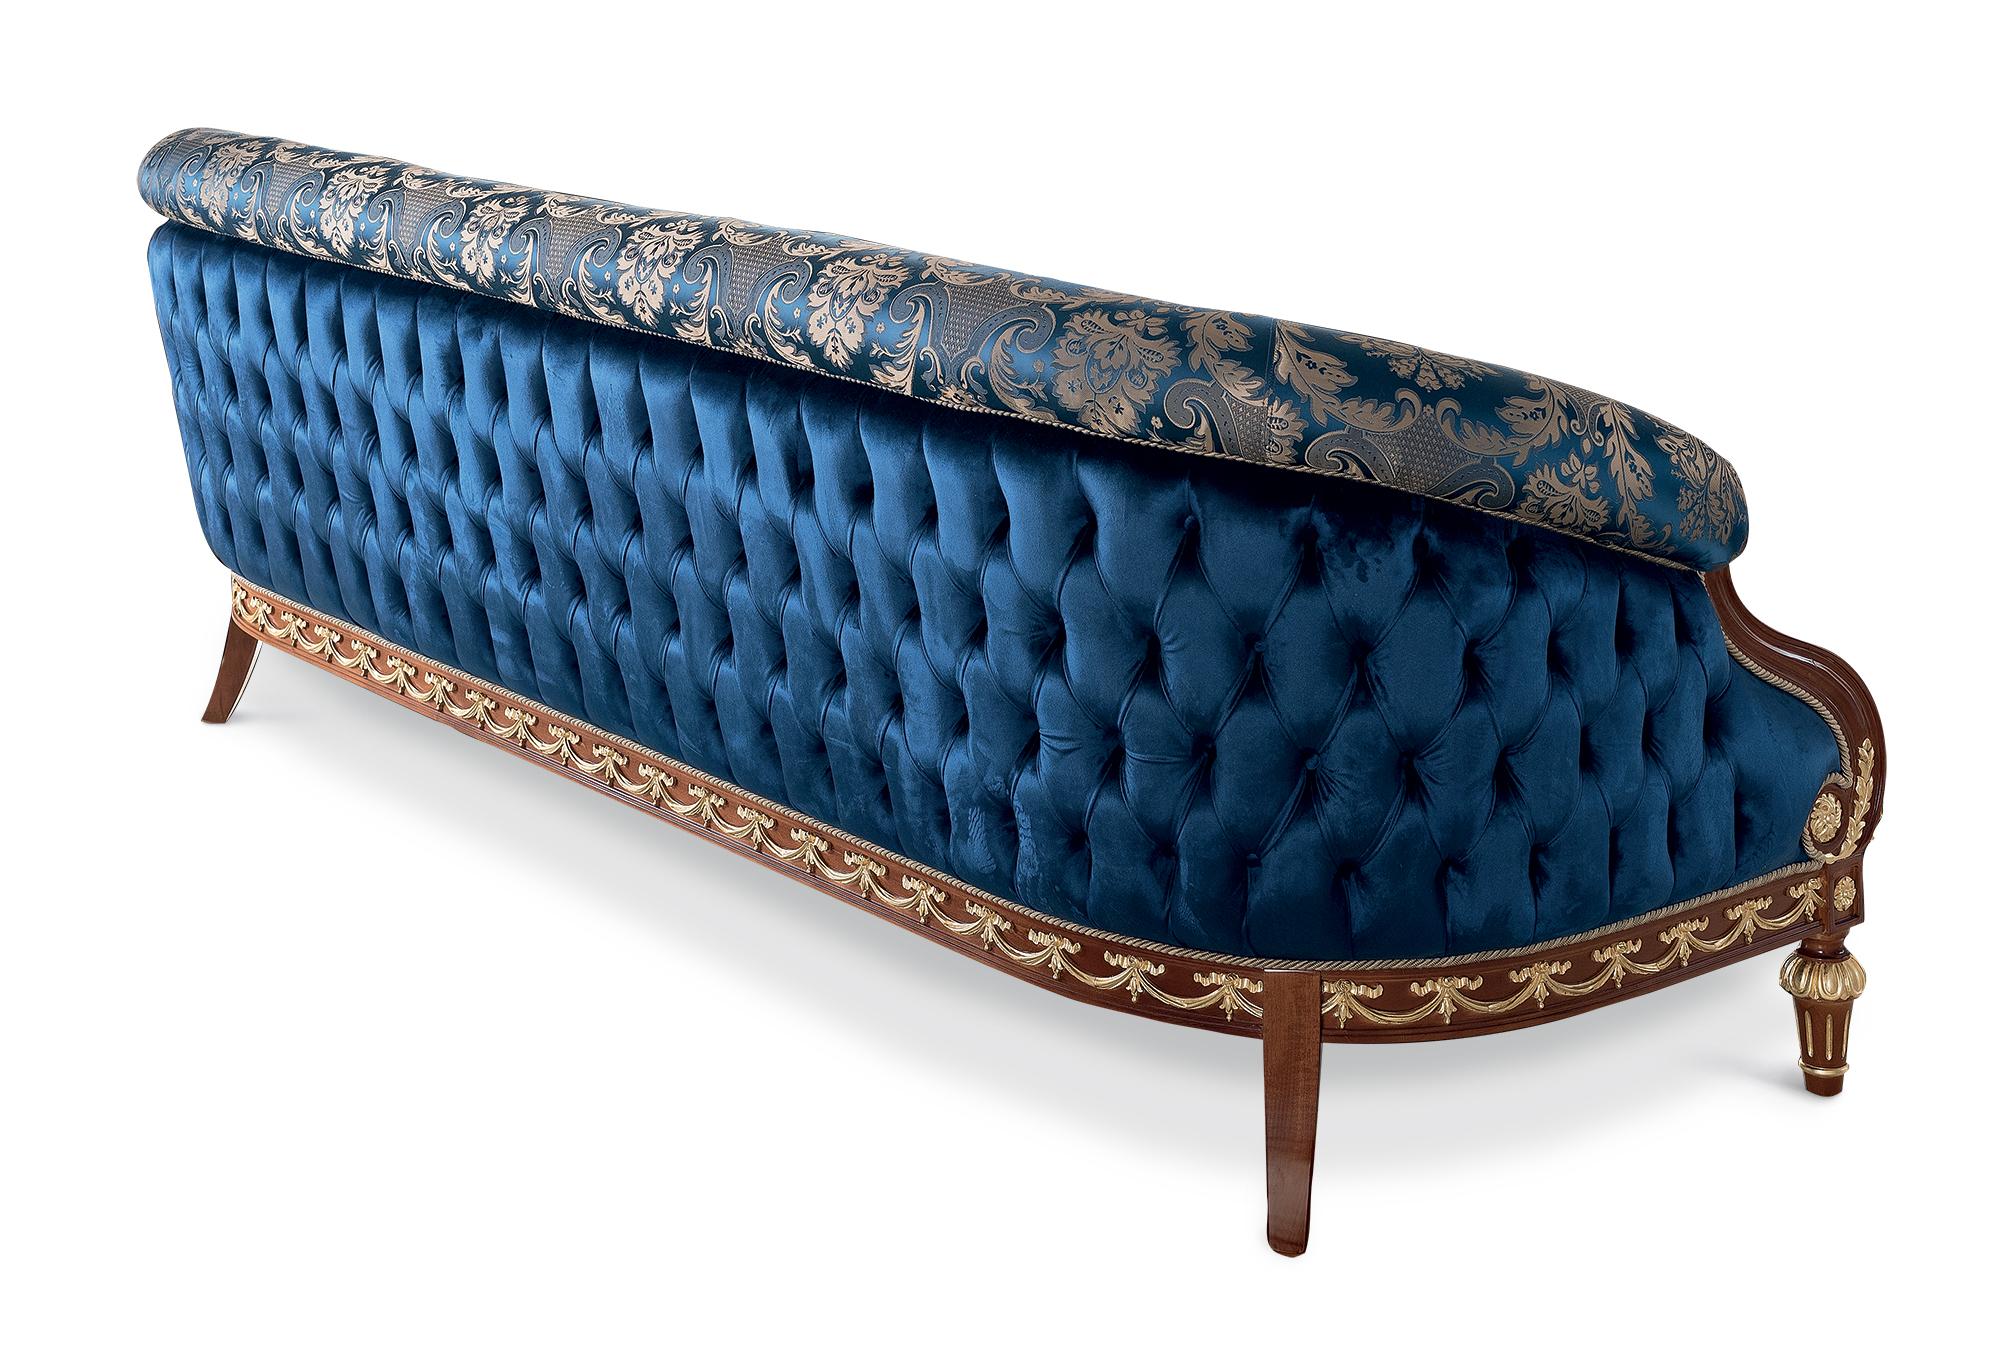 The bespoke noble blue three-seater sofa showcasing the finest work of classic artisanal craft. The curved seat welcomes its guests with two unique design features. Firstly, the stunning damask front upholstered with thick padding. Secondly, the